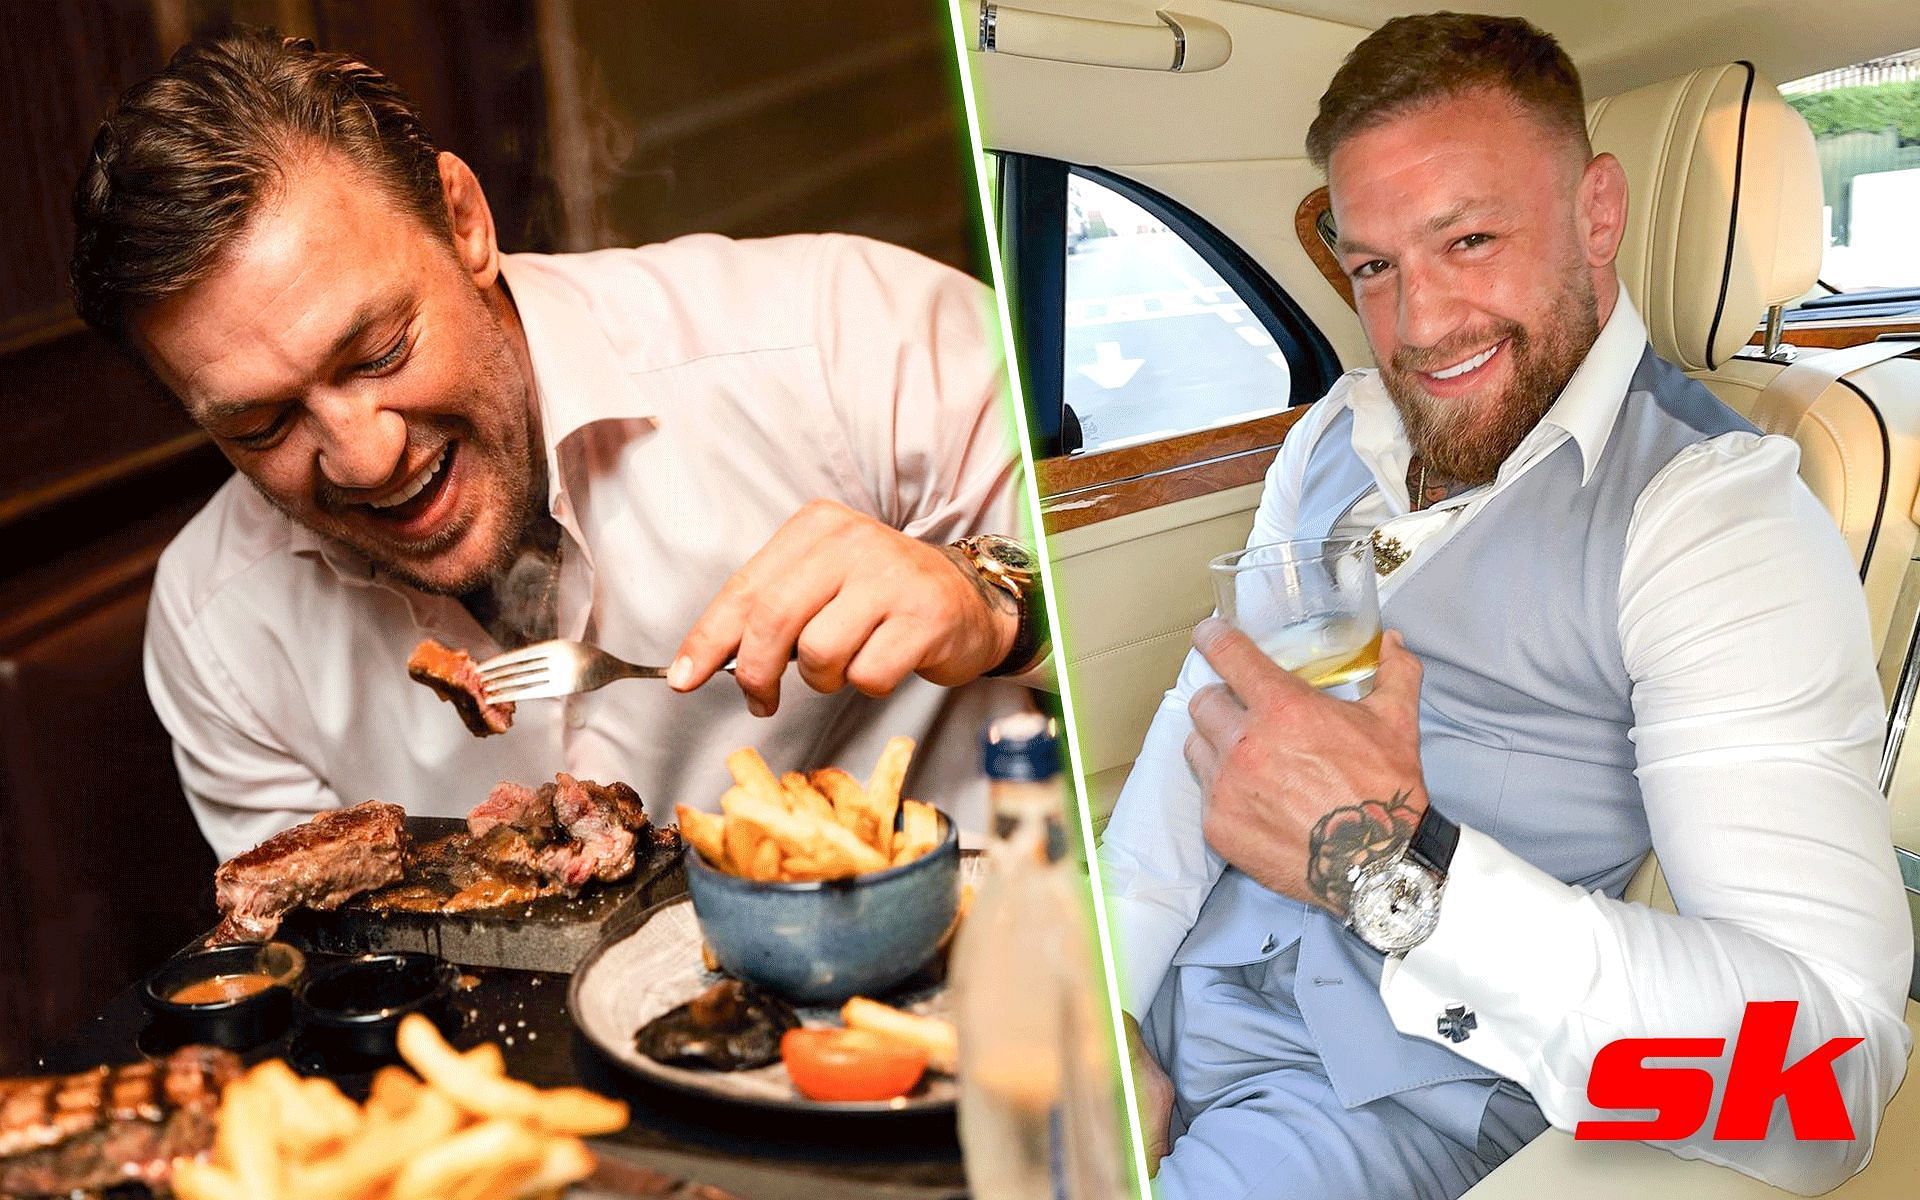 Conor McGregor [images courtesy of @thenotoriousmma/Instagram]